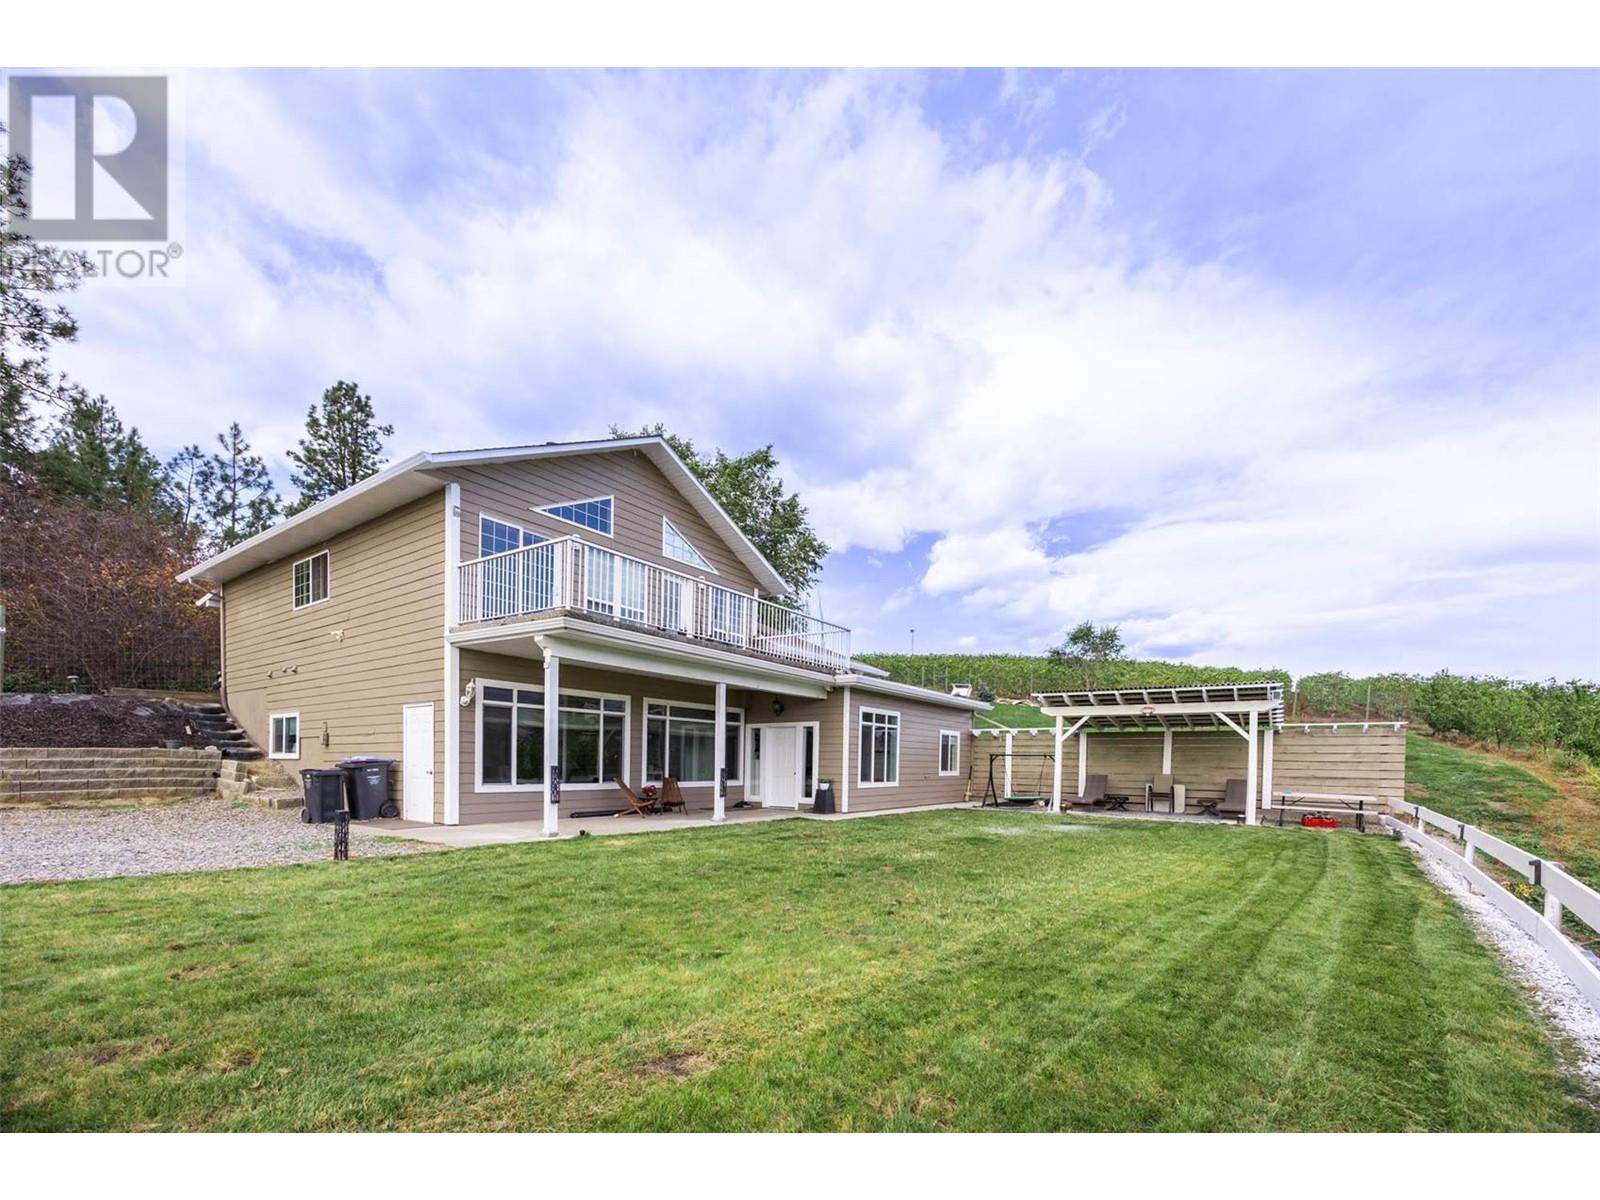  11937 Bartell Road, Lake Country